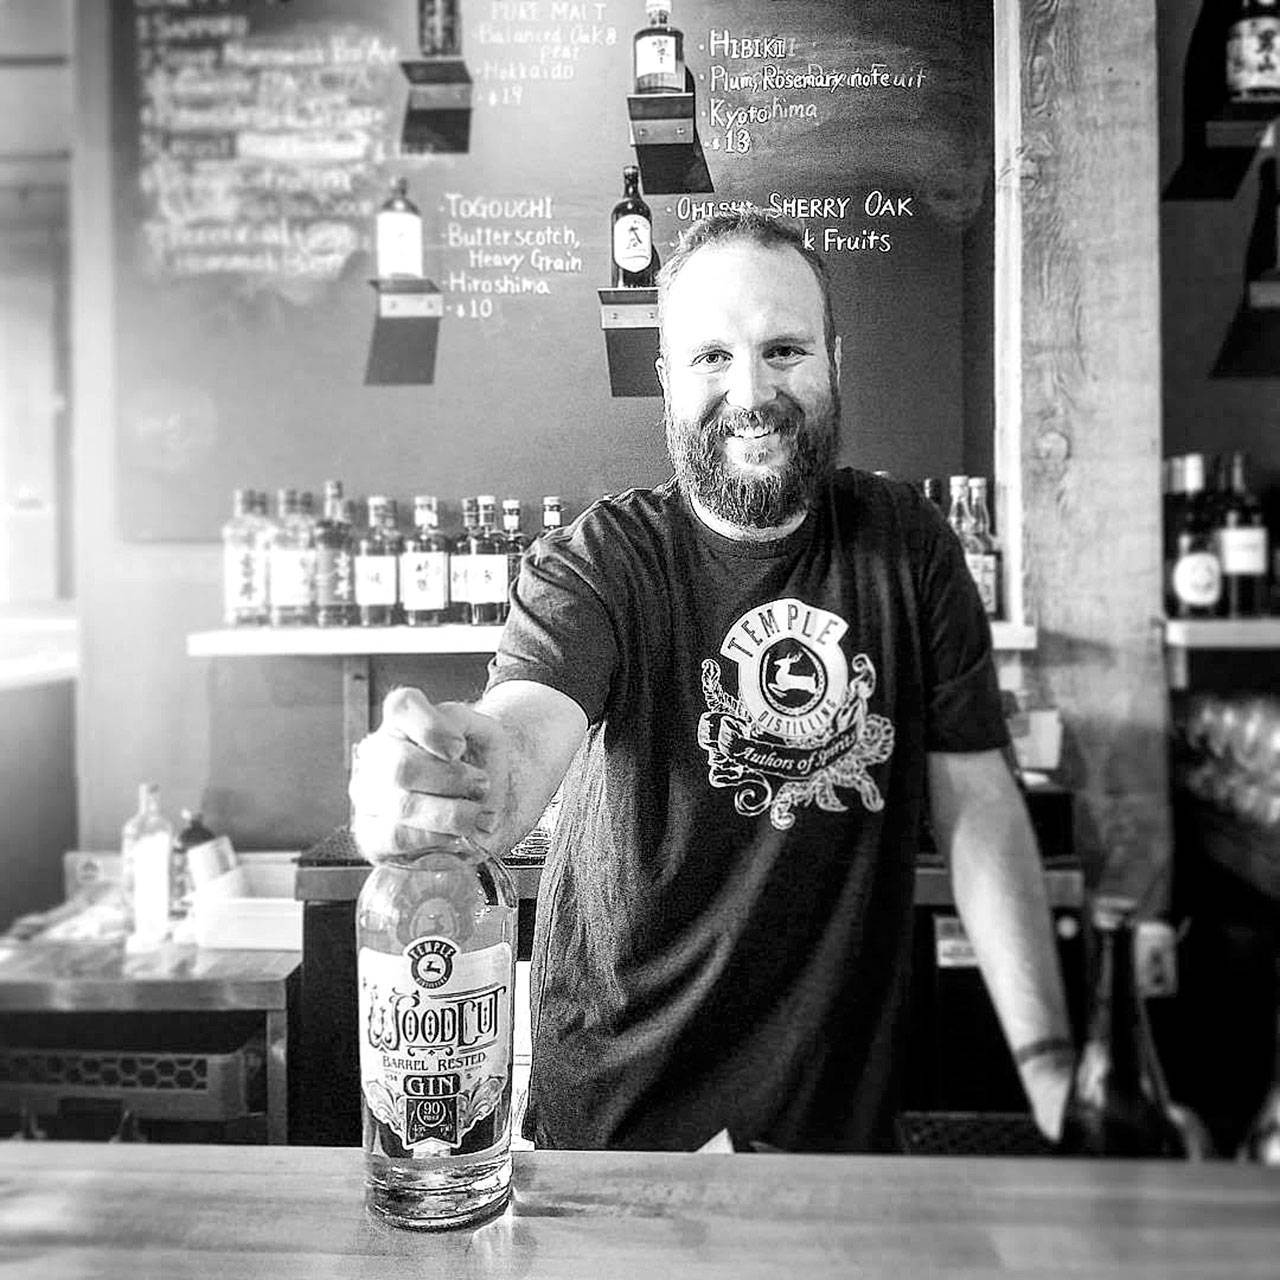 Jacob Lichty, of Wallingford’s Yoroshiku, was the winner in Temple Distilling’s Co-Authored Gin Project competition. Lichty used Temple Distilling’s Woodcut Barrel Rested Gin to make a drink with whiskey, cardamom and lavender. (Temple Distilling)